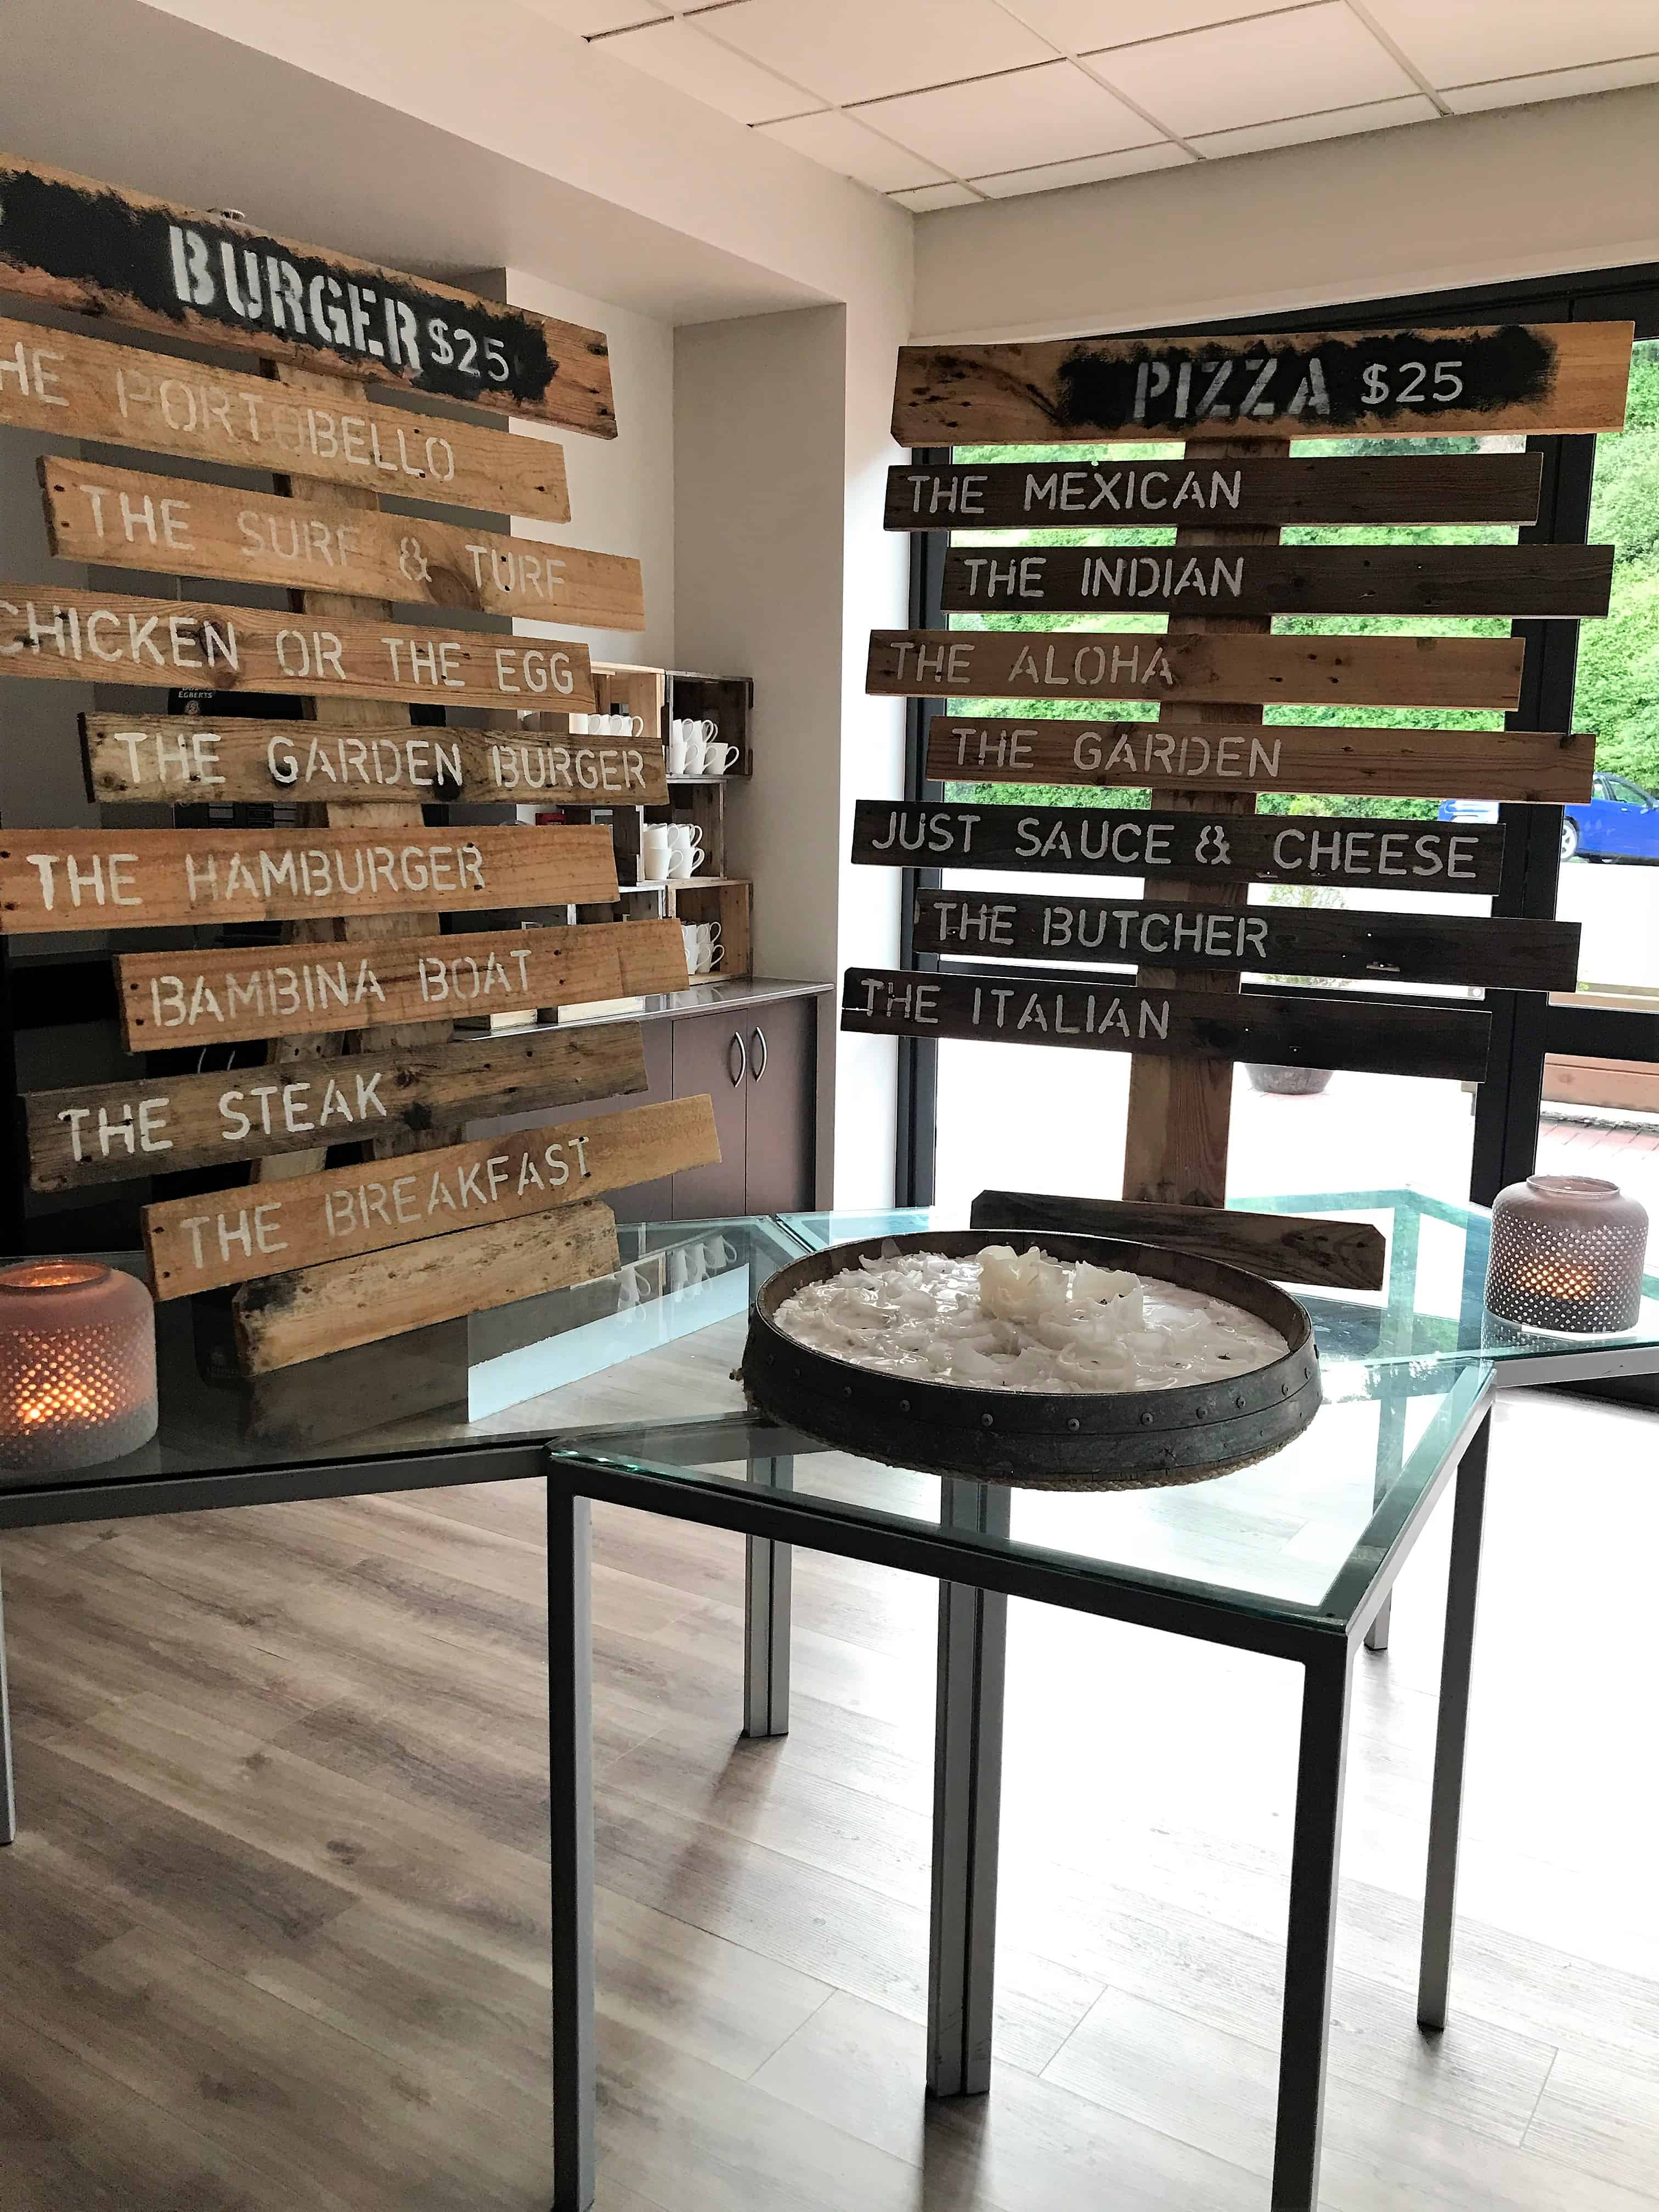 Ibis Hotel lobby with restaurant menu on wooden planks